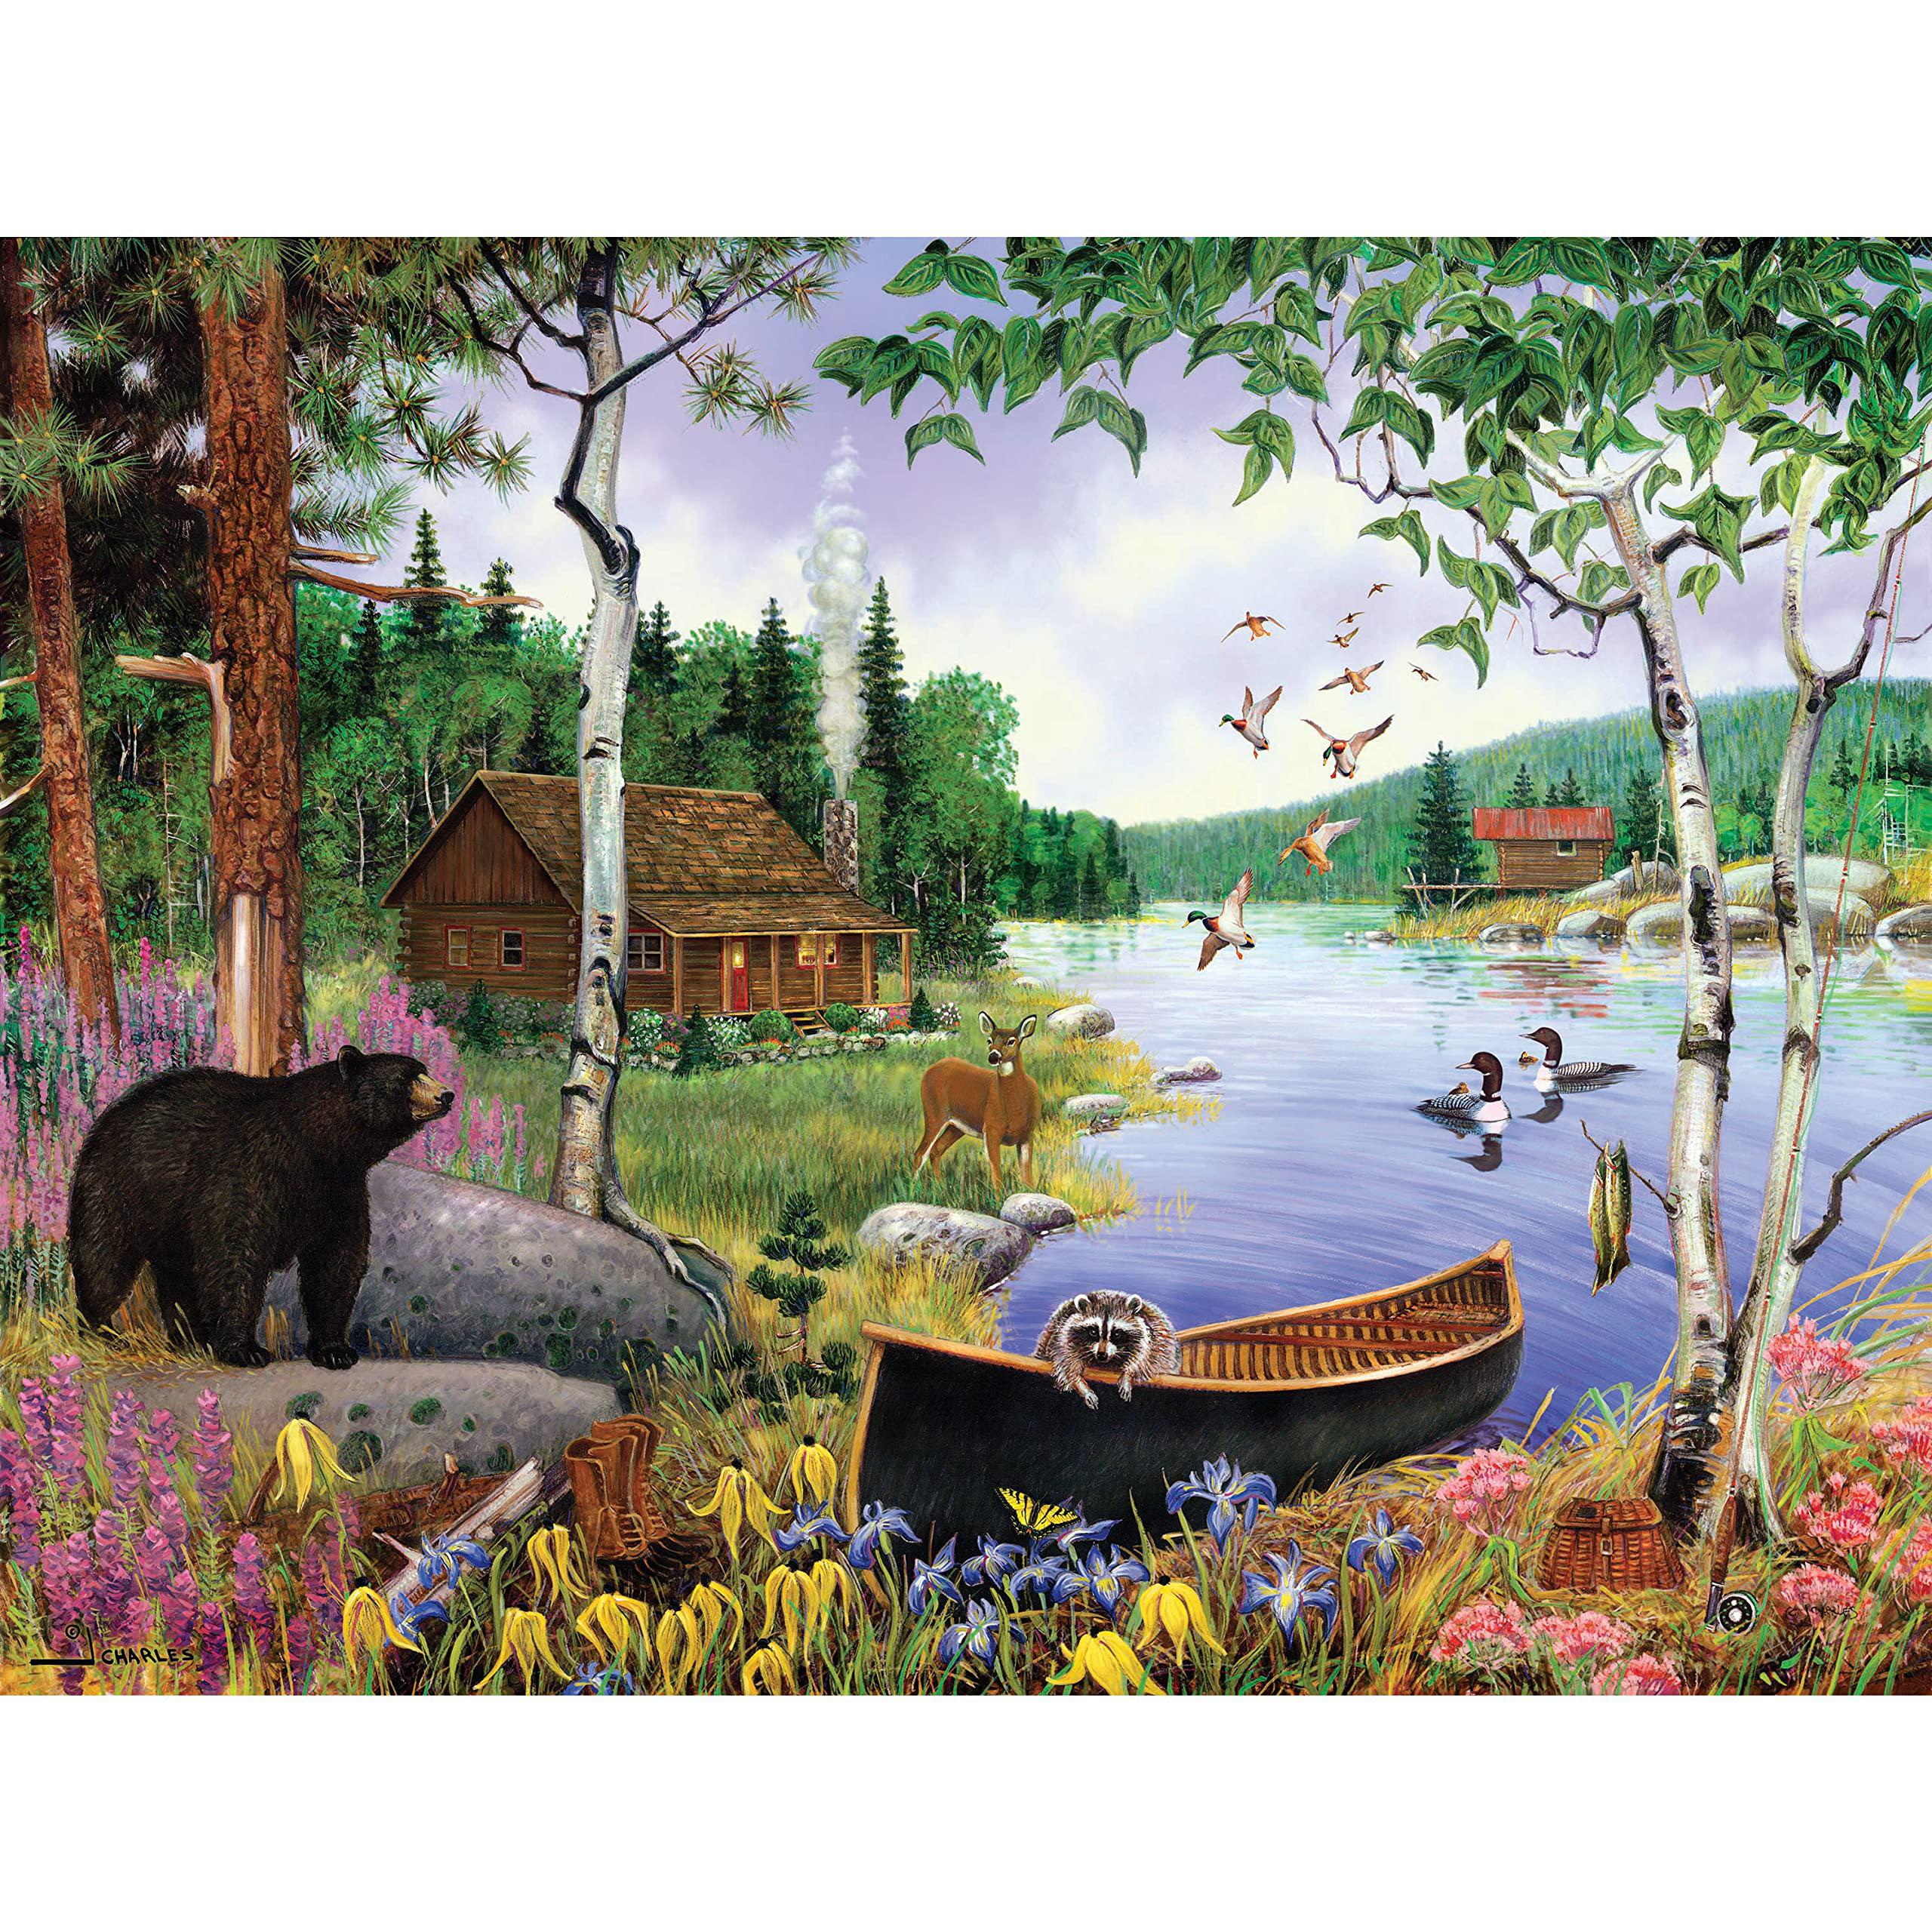 KI Puzzles 550 piece puzzle for adults black bear and cabin by j. charles 24x18 country life jigsaw from ki puzzles (02632-sb)